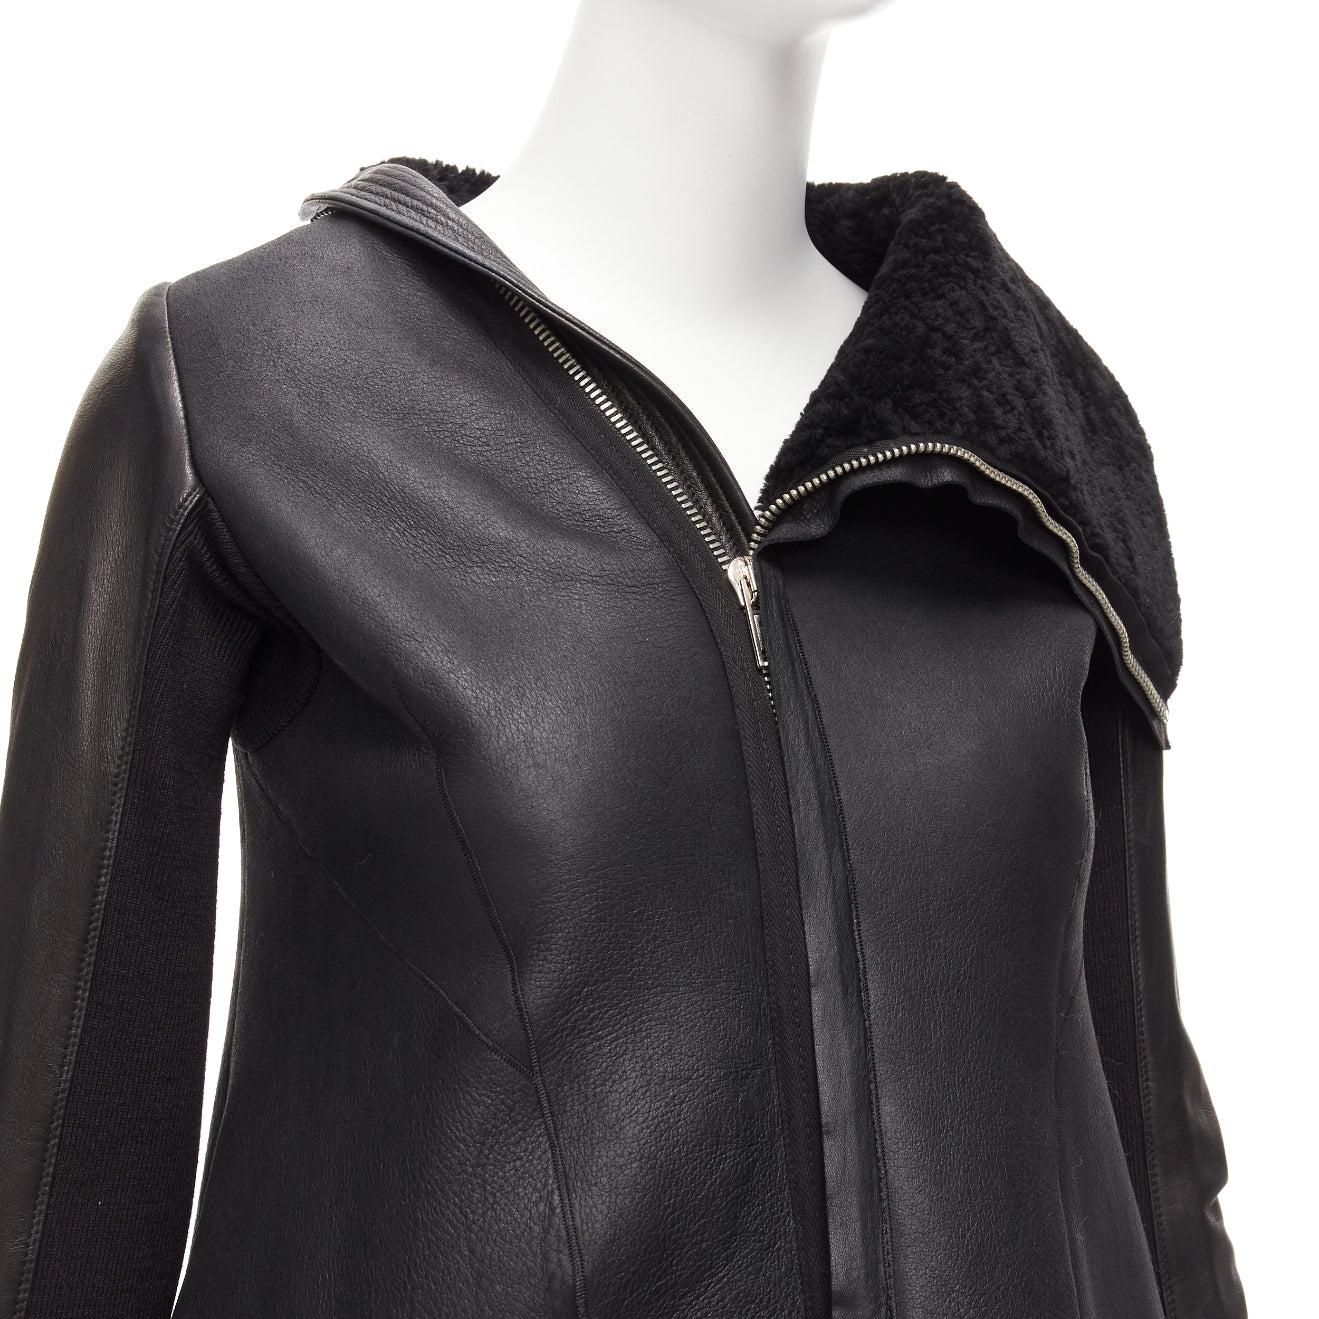 RICK OWENS black lamb leather shearling lined asymmetric coat IT38 XS
Reference: SSLG/A00003
Brand: Rick Owens
Designer: Rick Owens
Material: Lambskin Leather, Wool
Color: Black, Silver
Pattern: Solid
Closure: Zip
Lining: Black
Extra Details: Zip